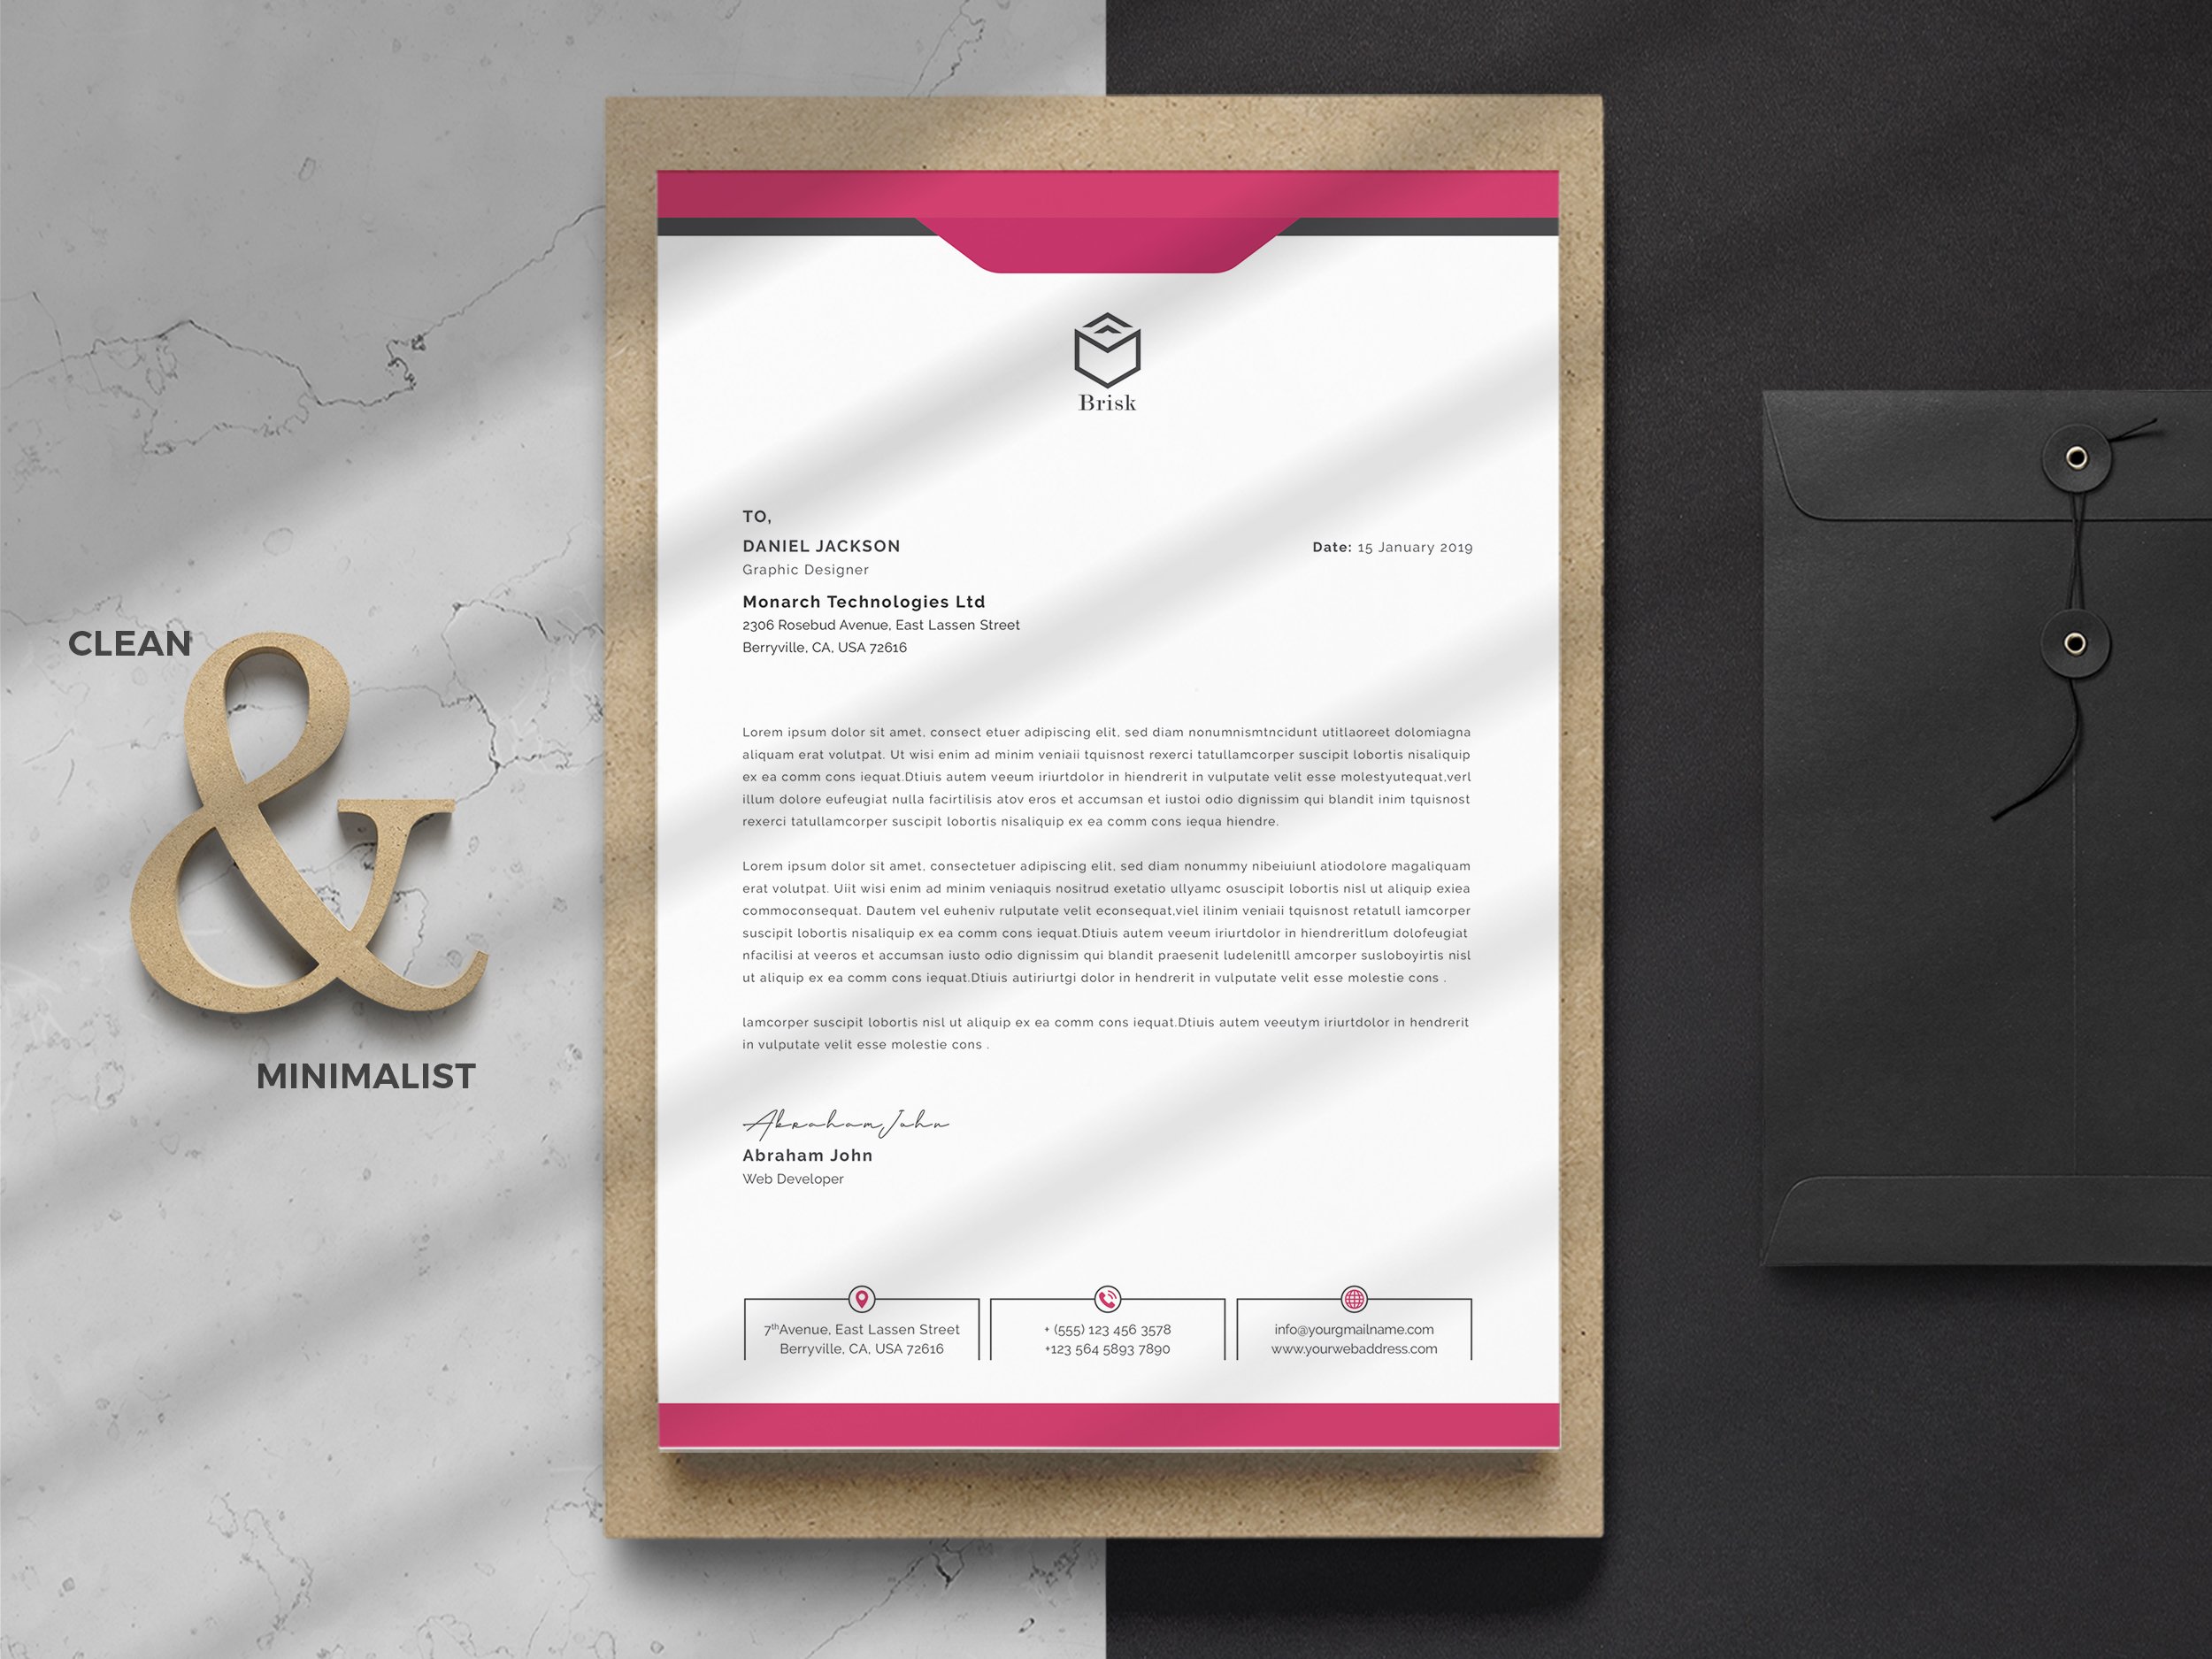 Clean Letterhead Word preview image.